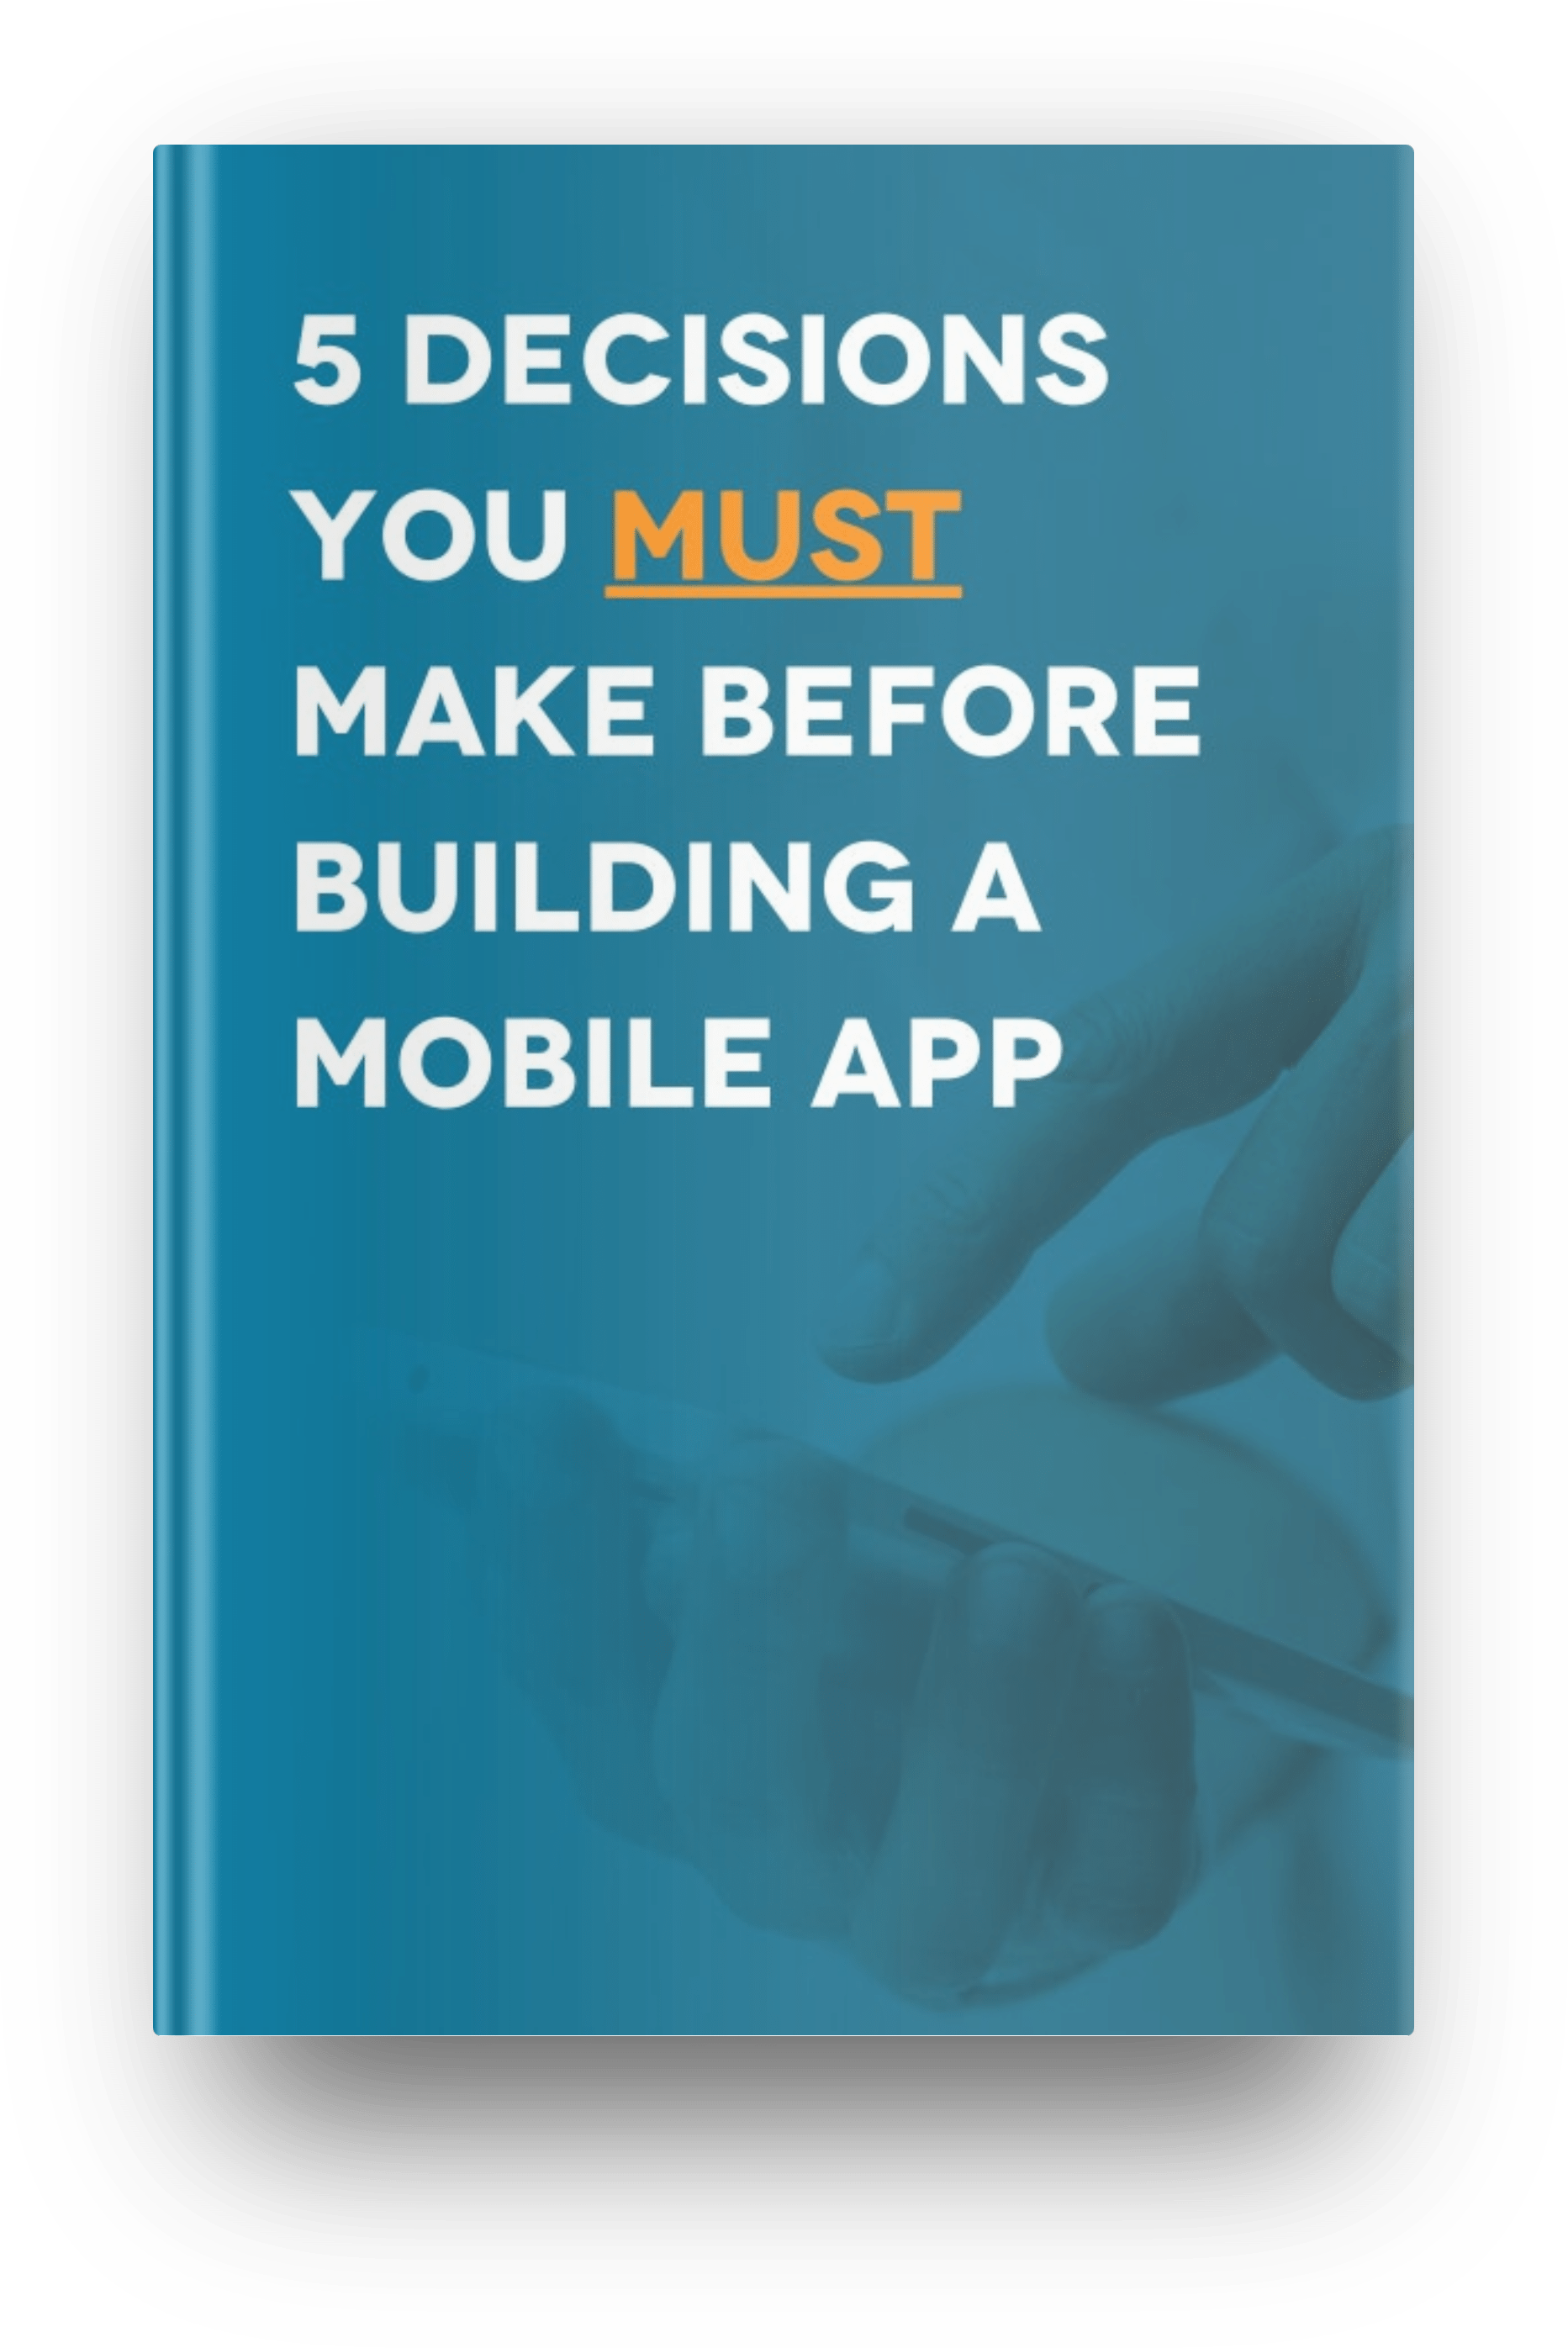 booklet PDF download saying 5 decisions you must make before building a mobile app